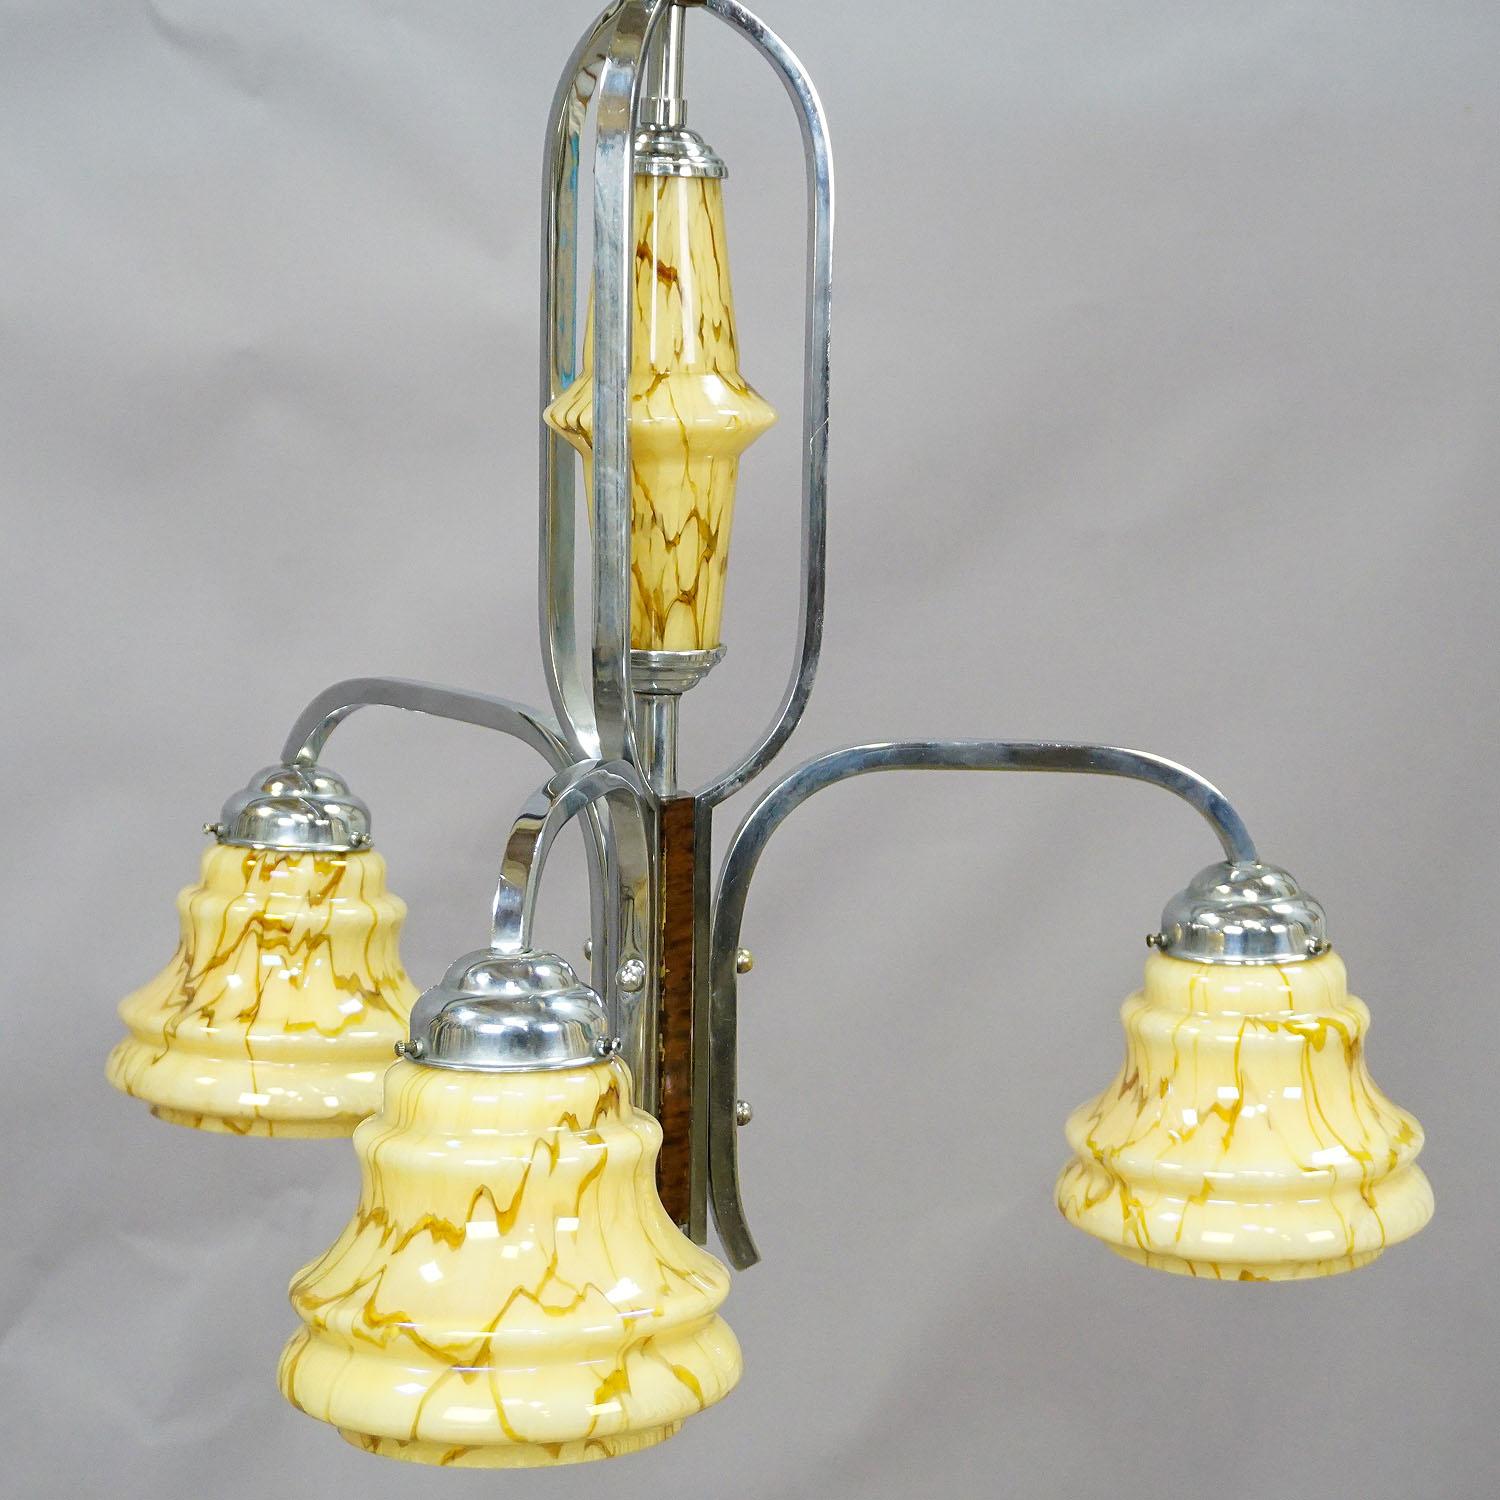 German Antique Art Deco Chandelier with Three Glass Shades For Sale